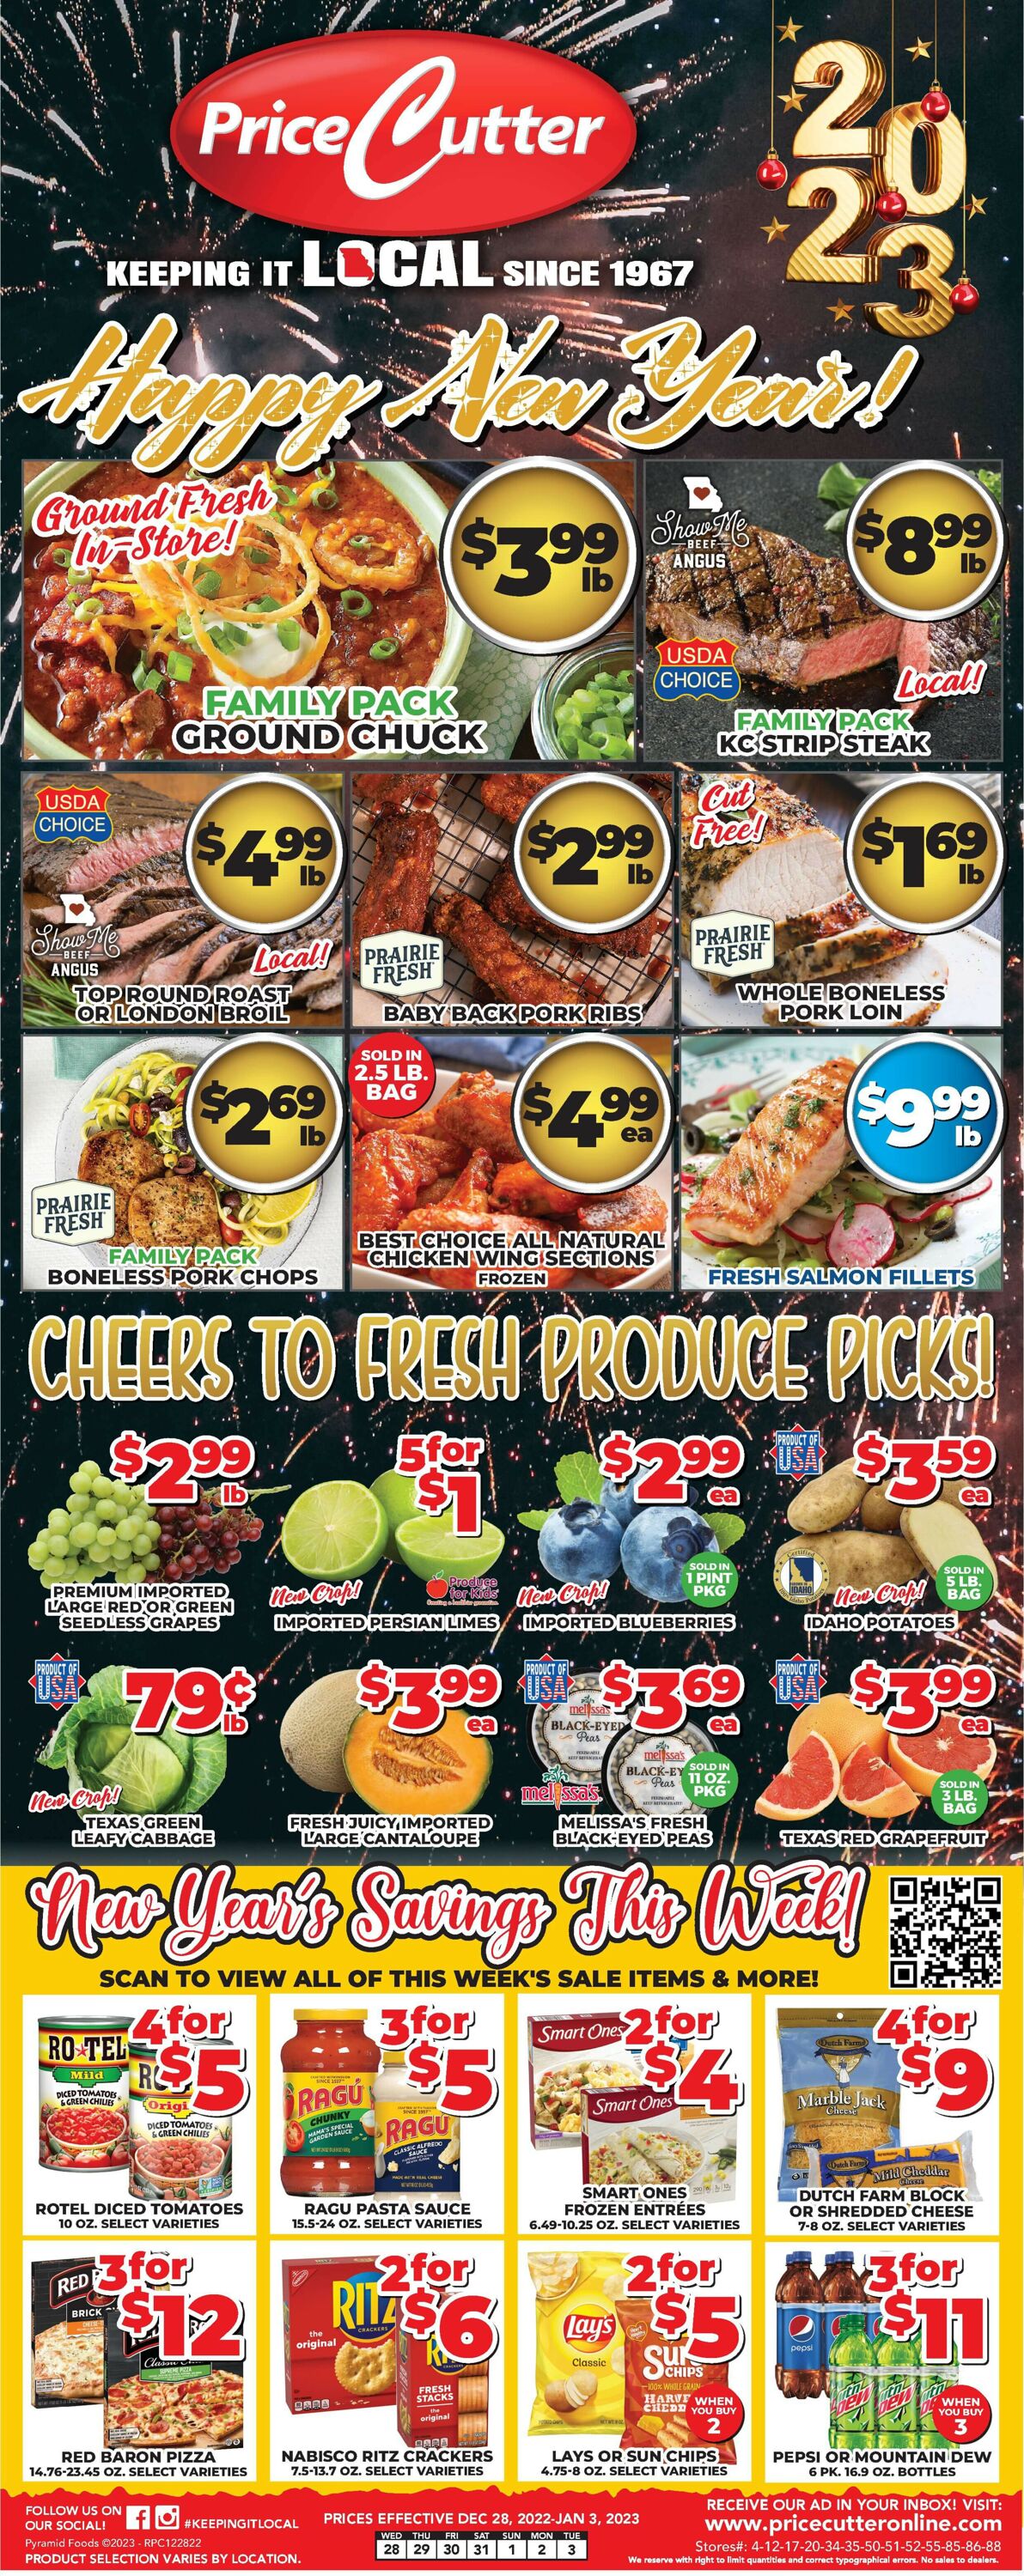 Price Cutter Weekly Ad Circular - valid 12/28-01/03/2023